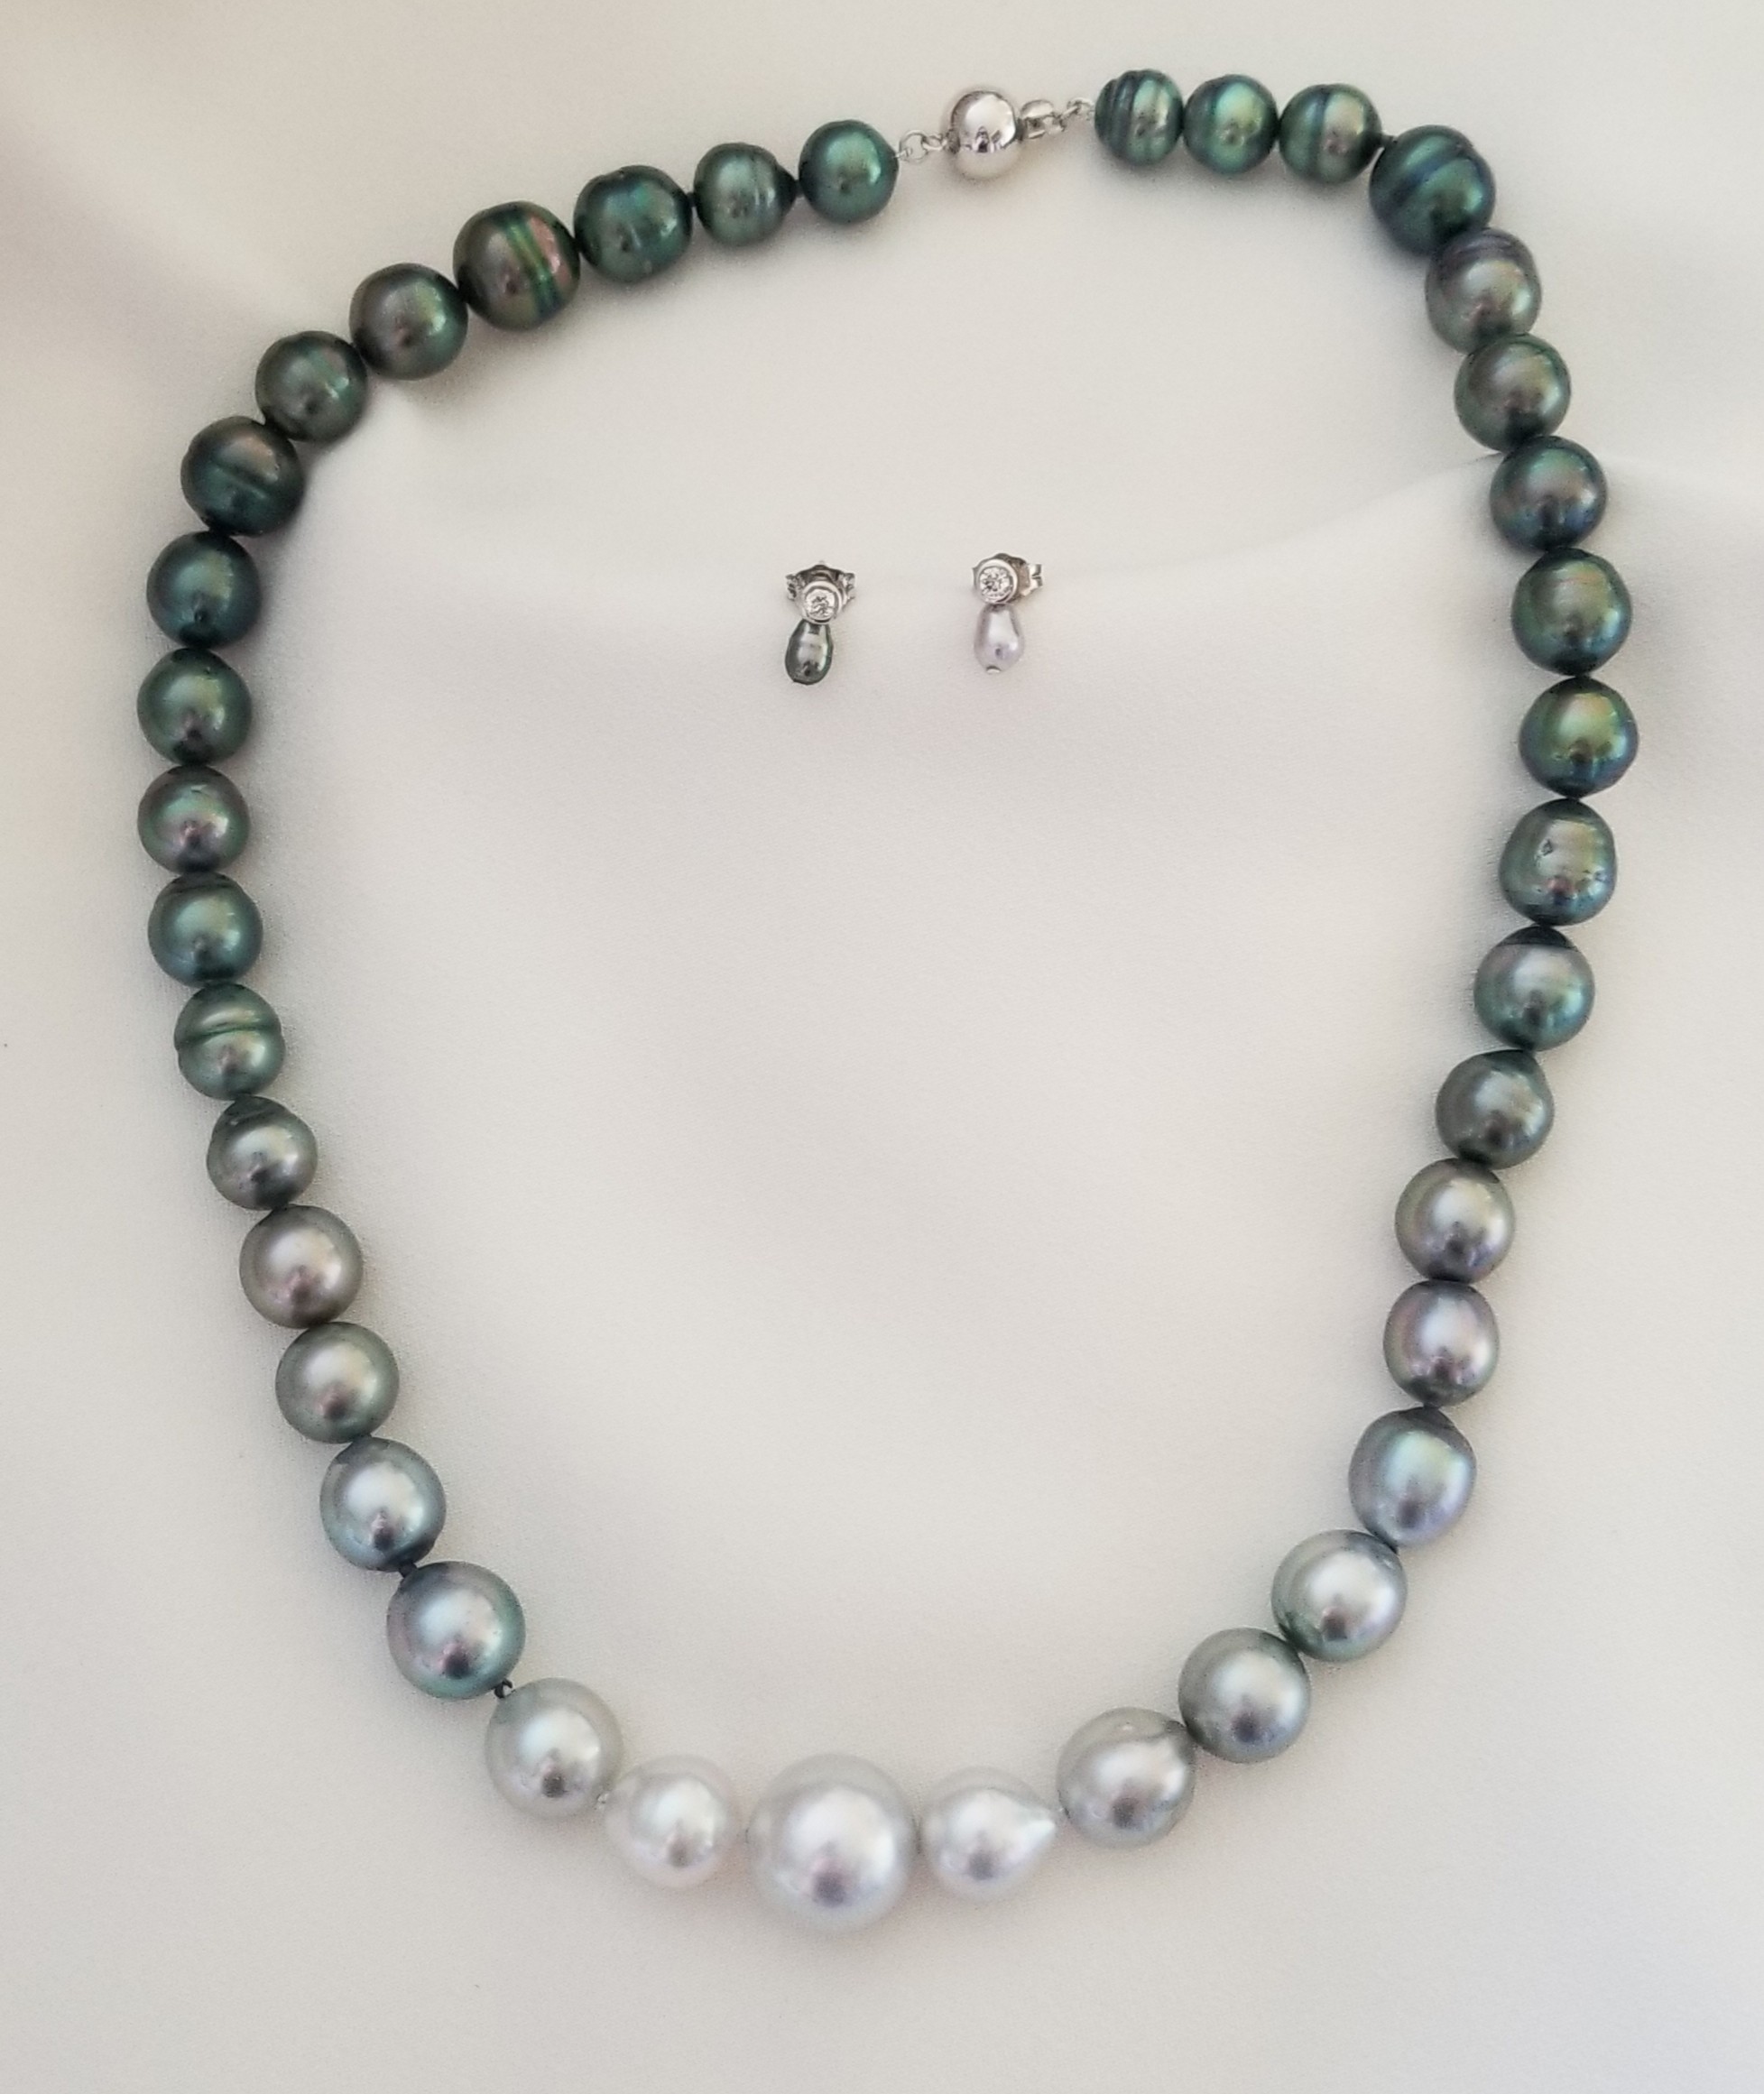 Tahitian and white South Sea ombre necklace